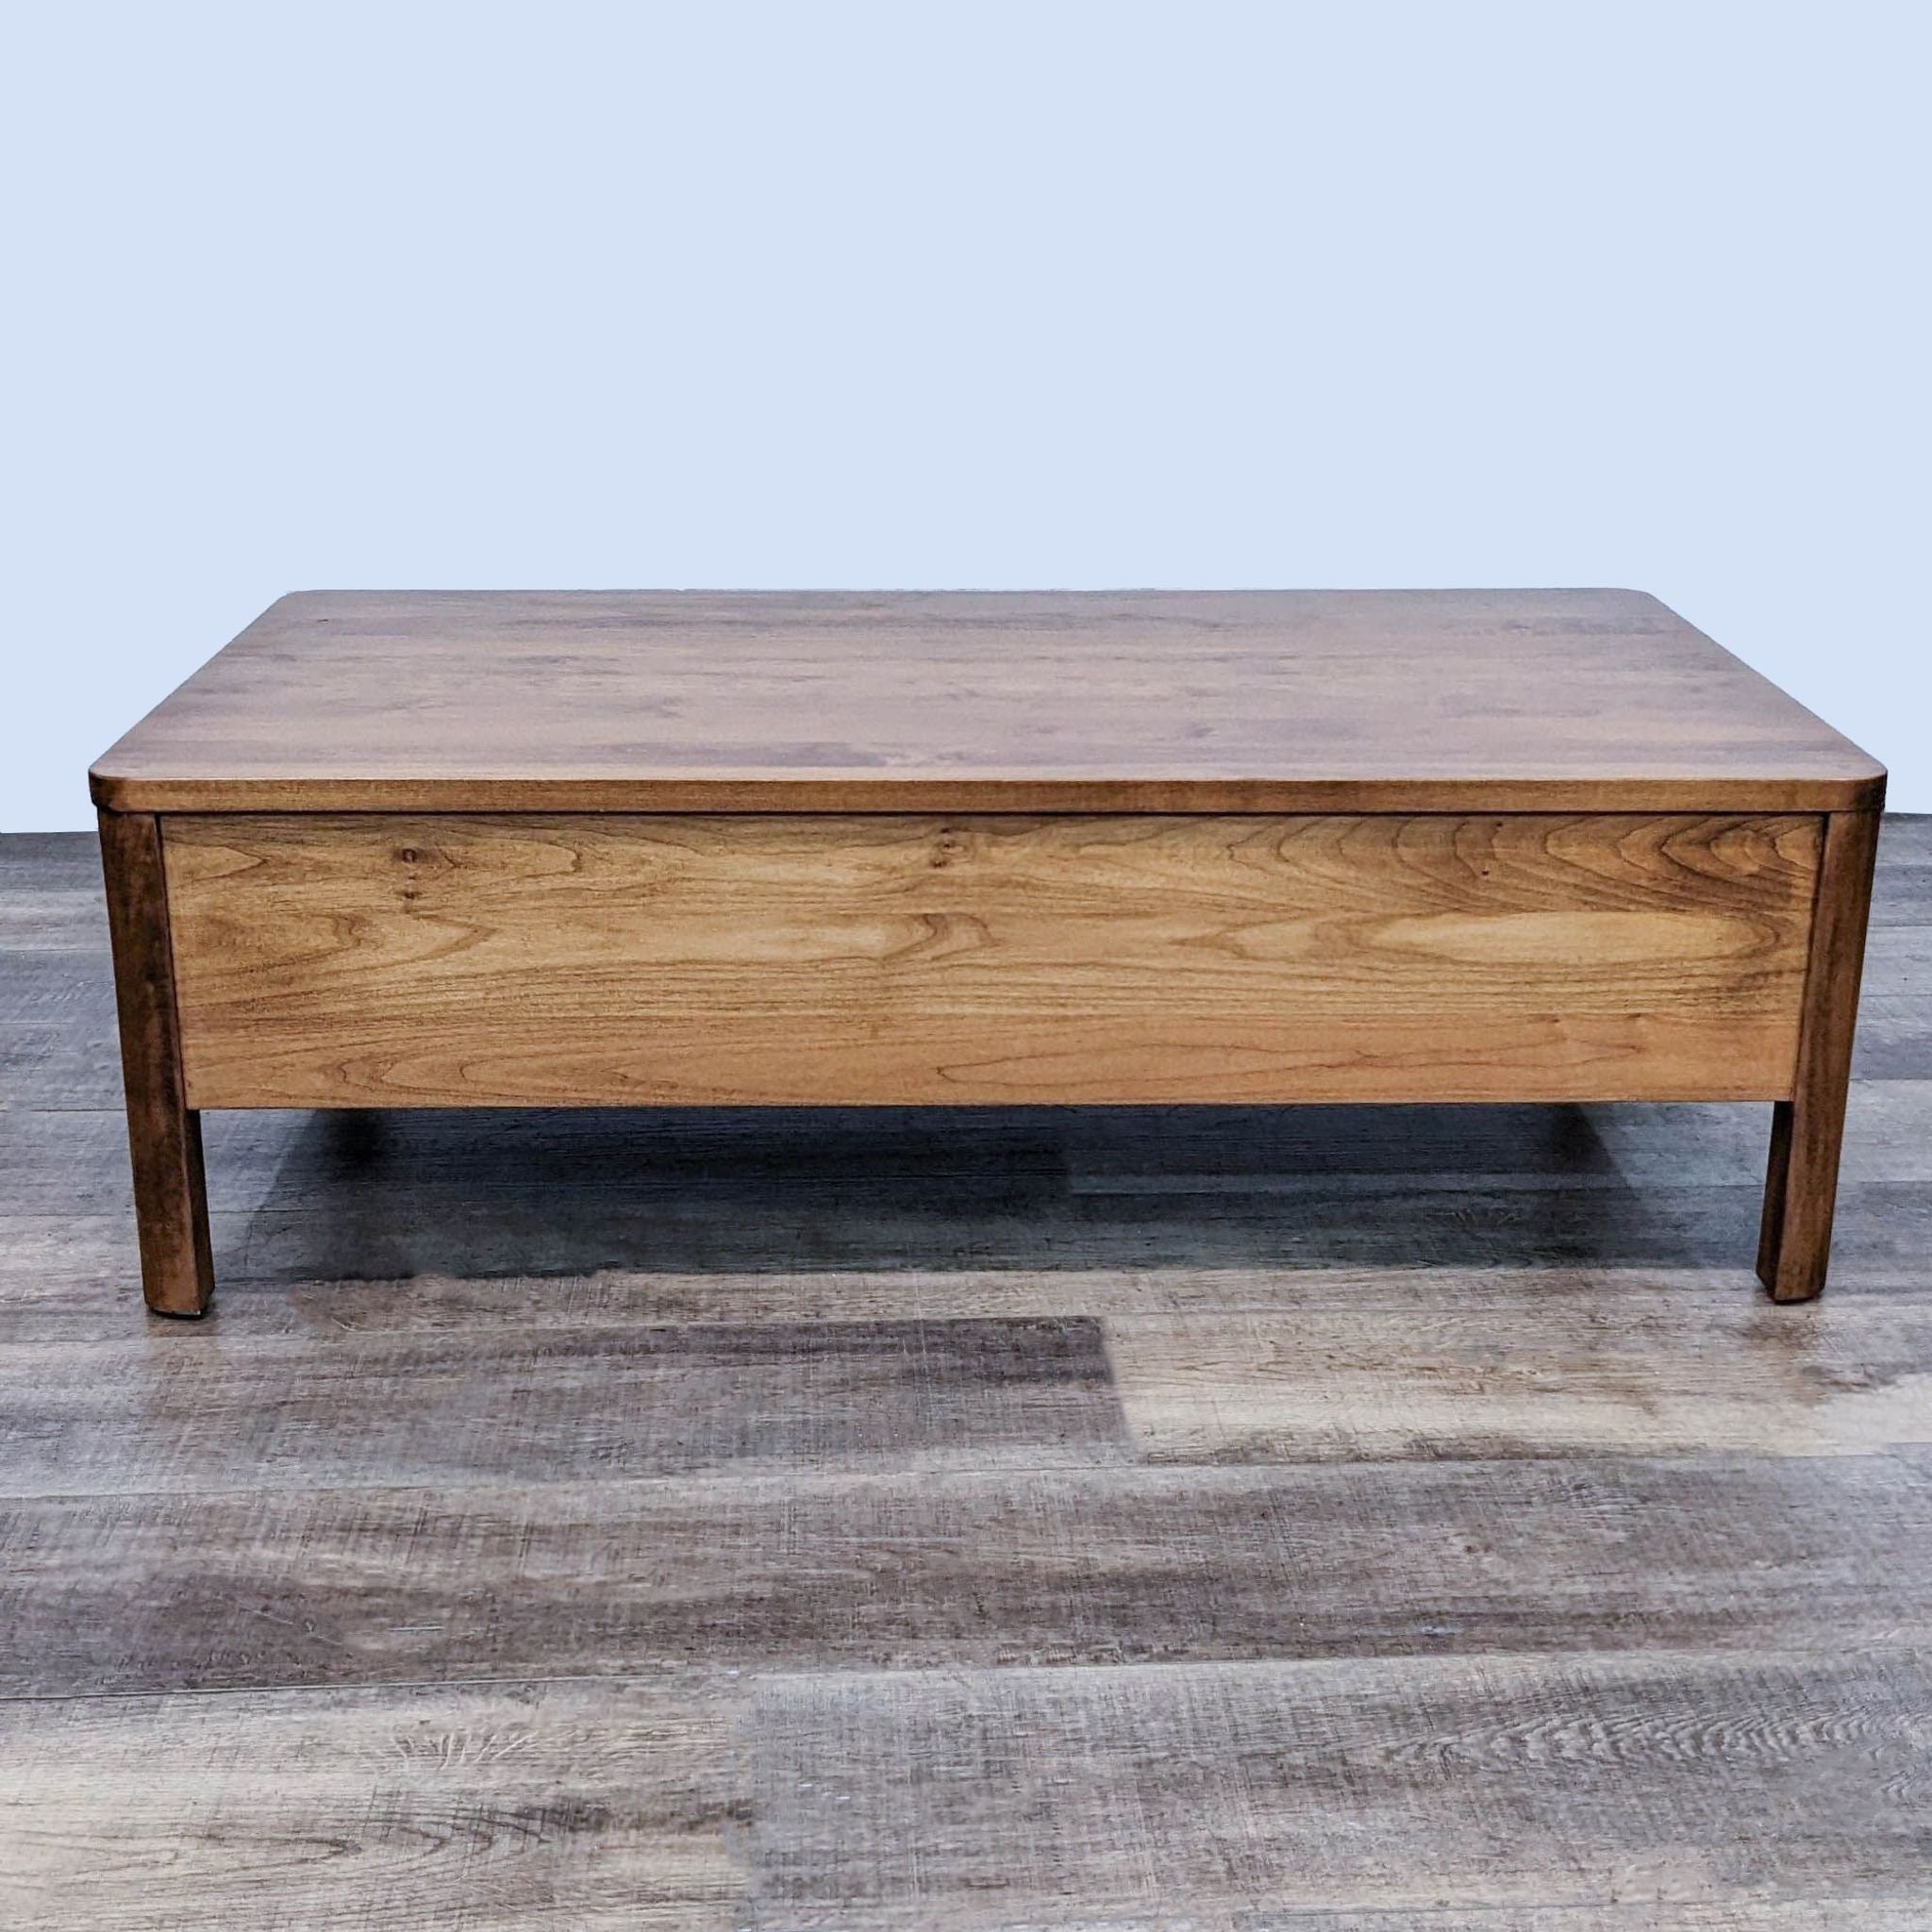 Warm natural finish Wood Castle coffee table with two drawers on a wooden floor.